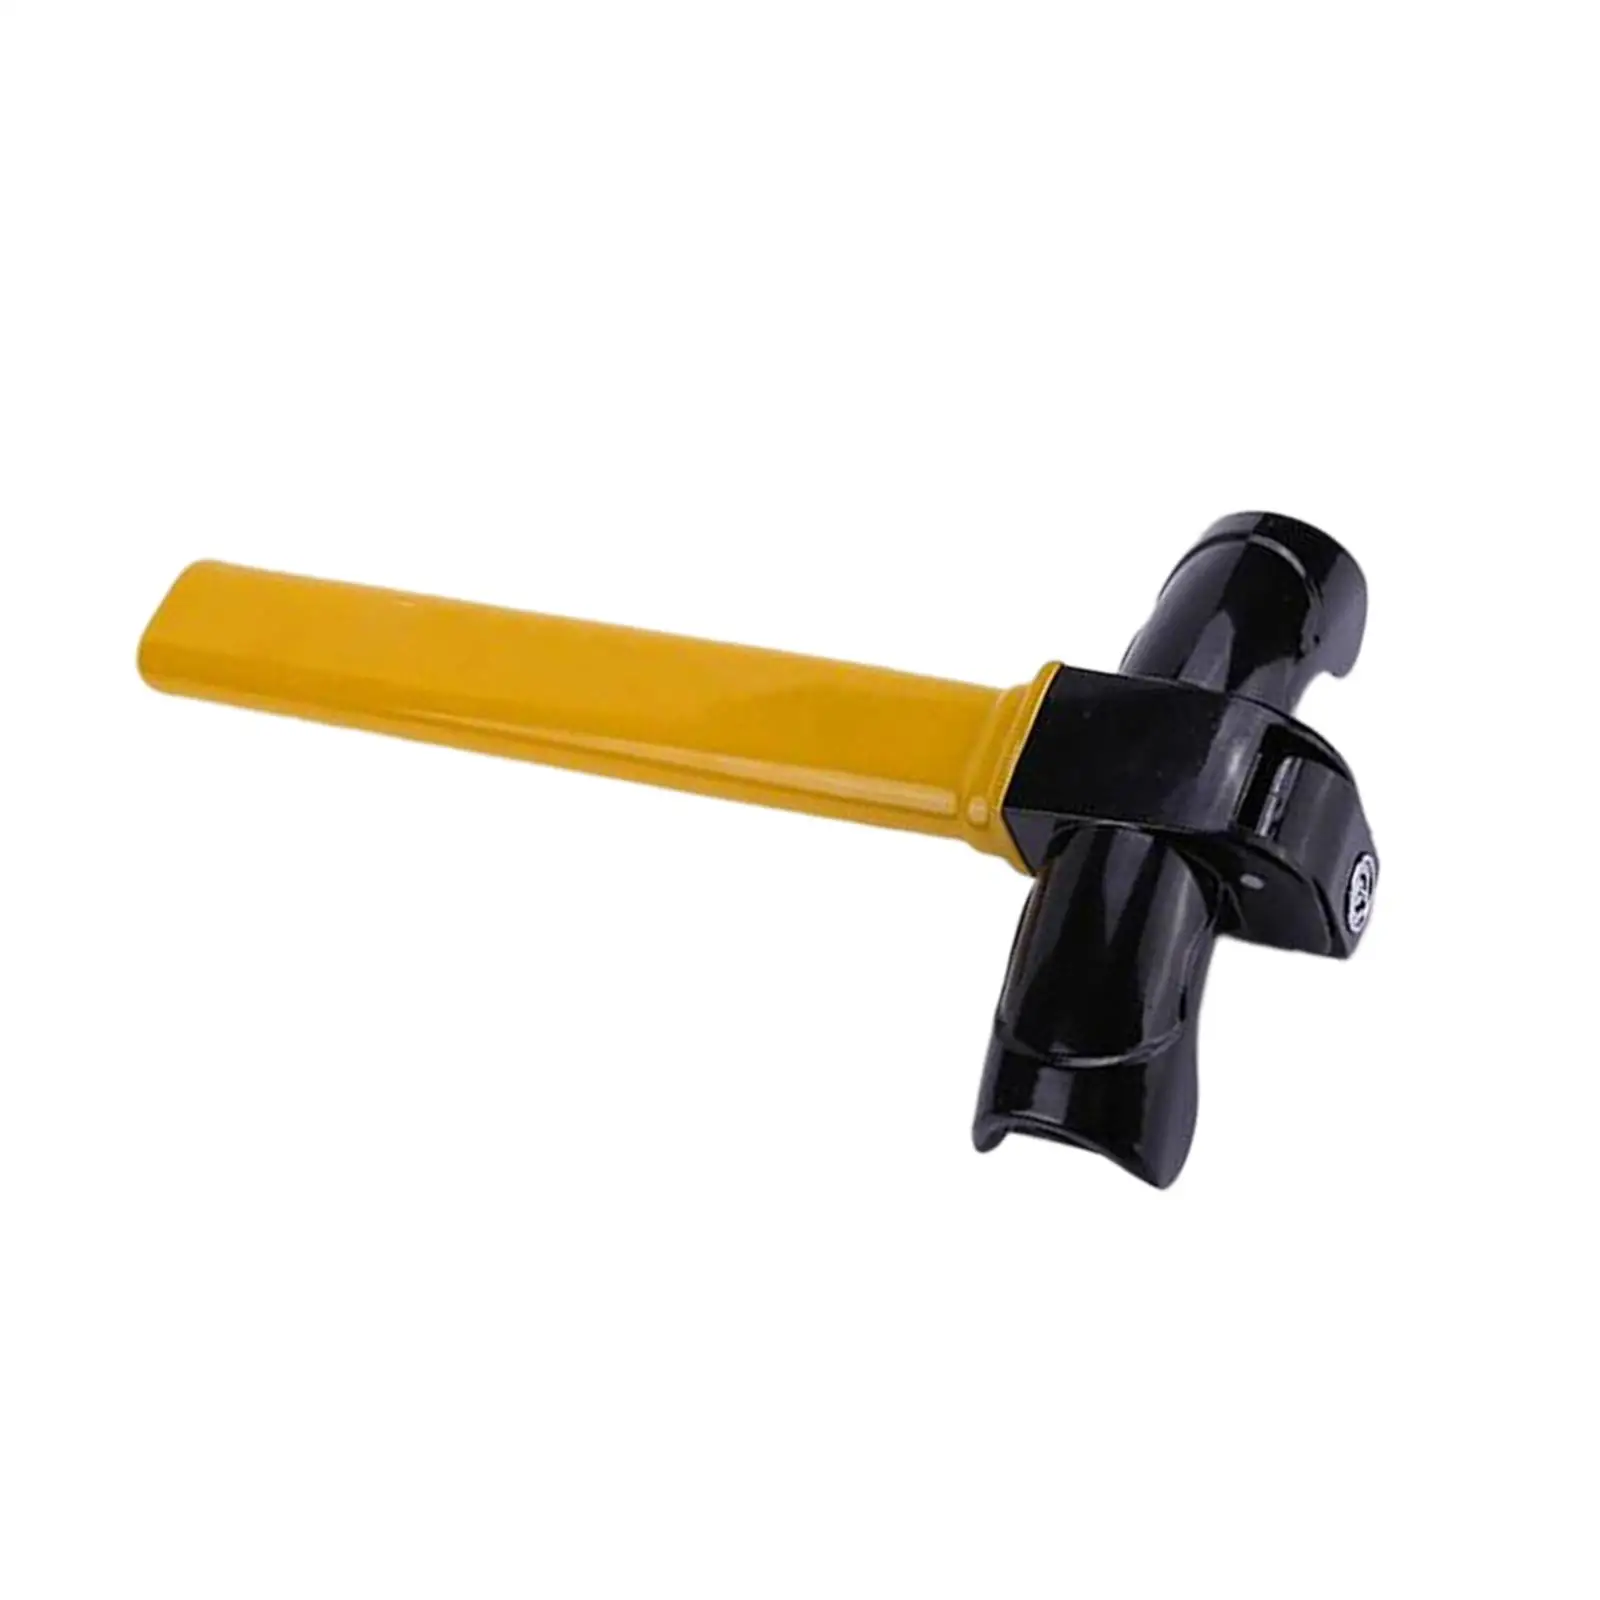 Car Steering Wheel Lock Tool with 2 Keys Comfortable Handle Sturdy Round Cylinder Heavy Duty T Shaped for SUV Truck Van